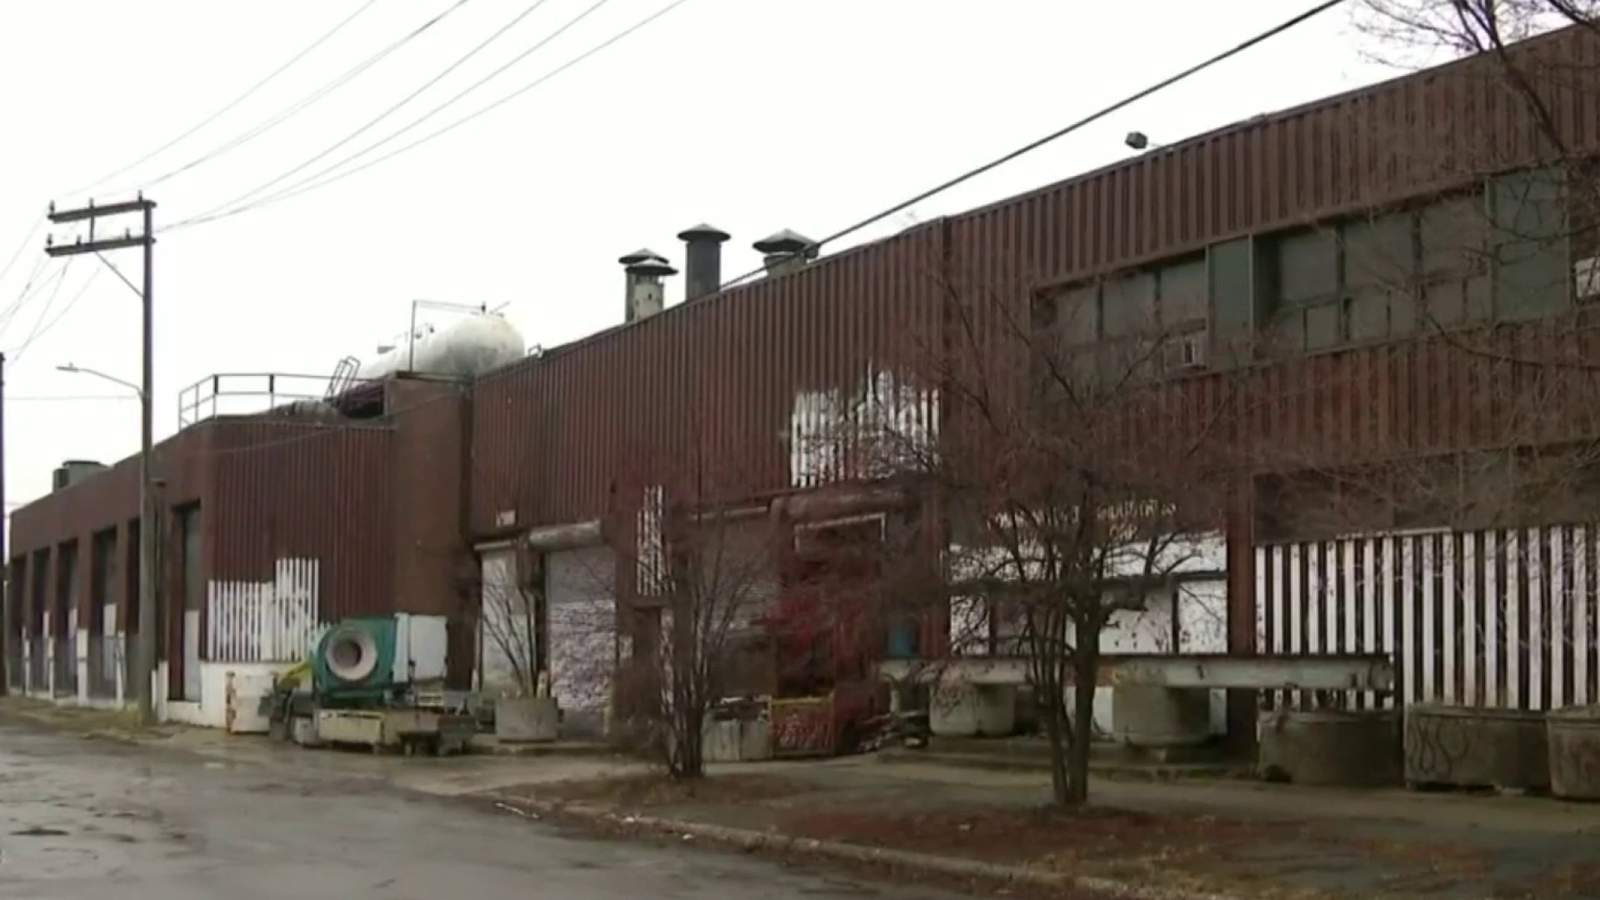 Toxic ooze investigation: Alarming discovery inside Detroit building